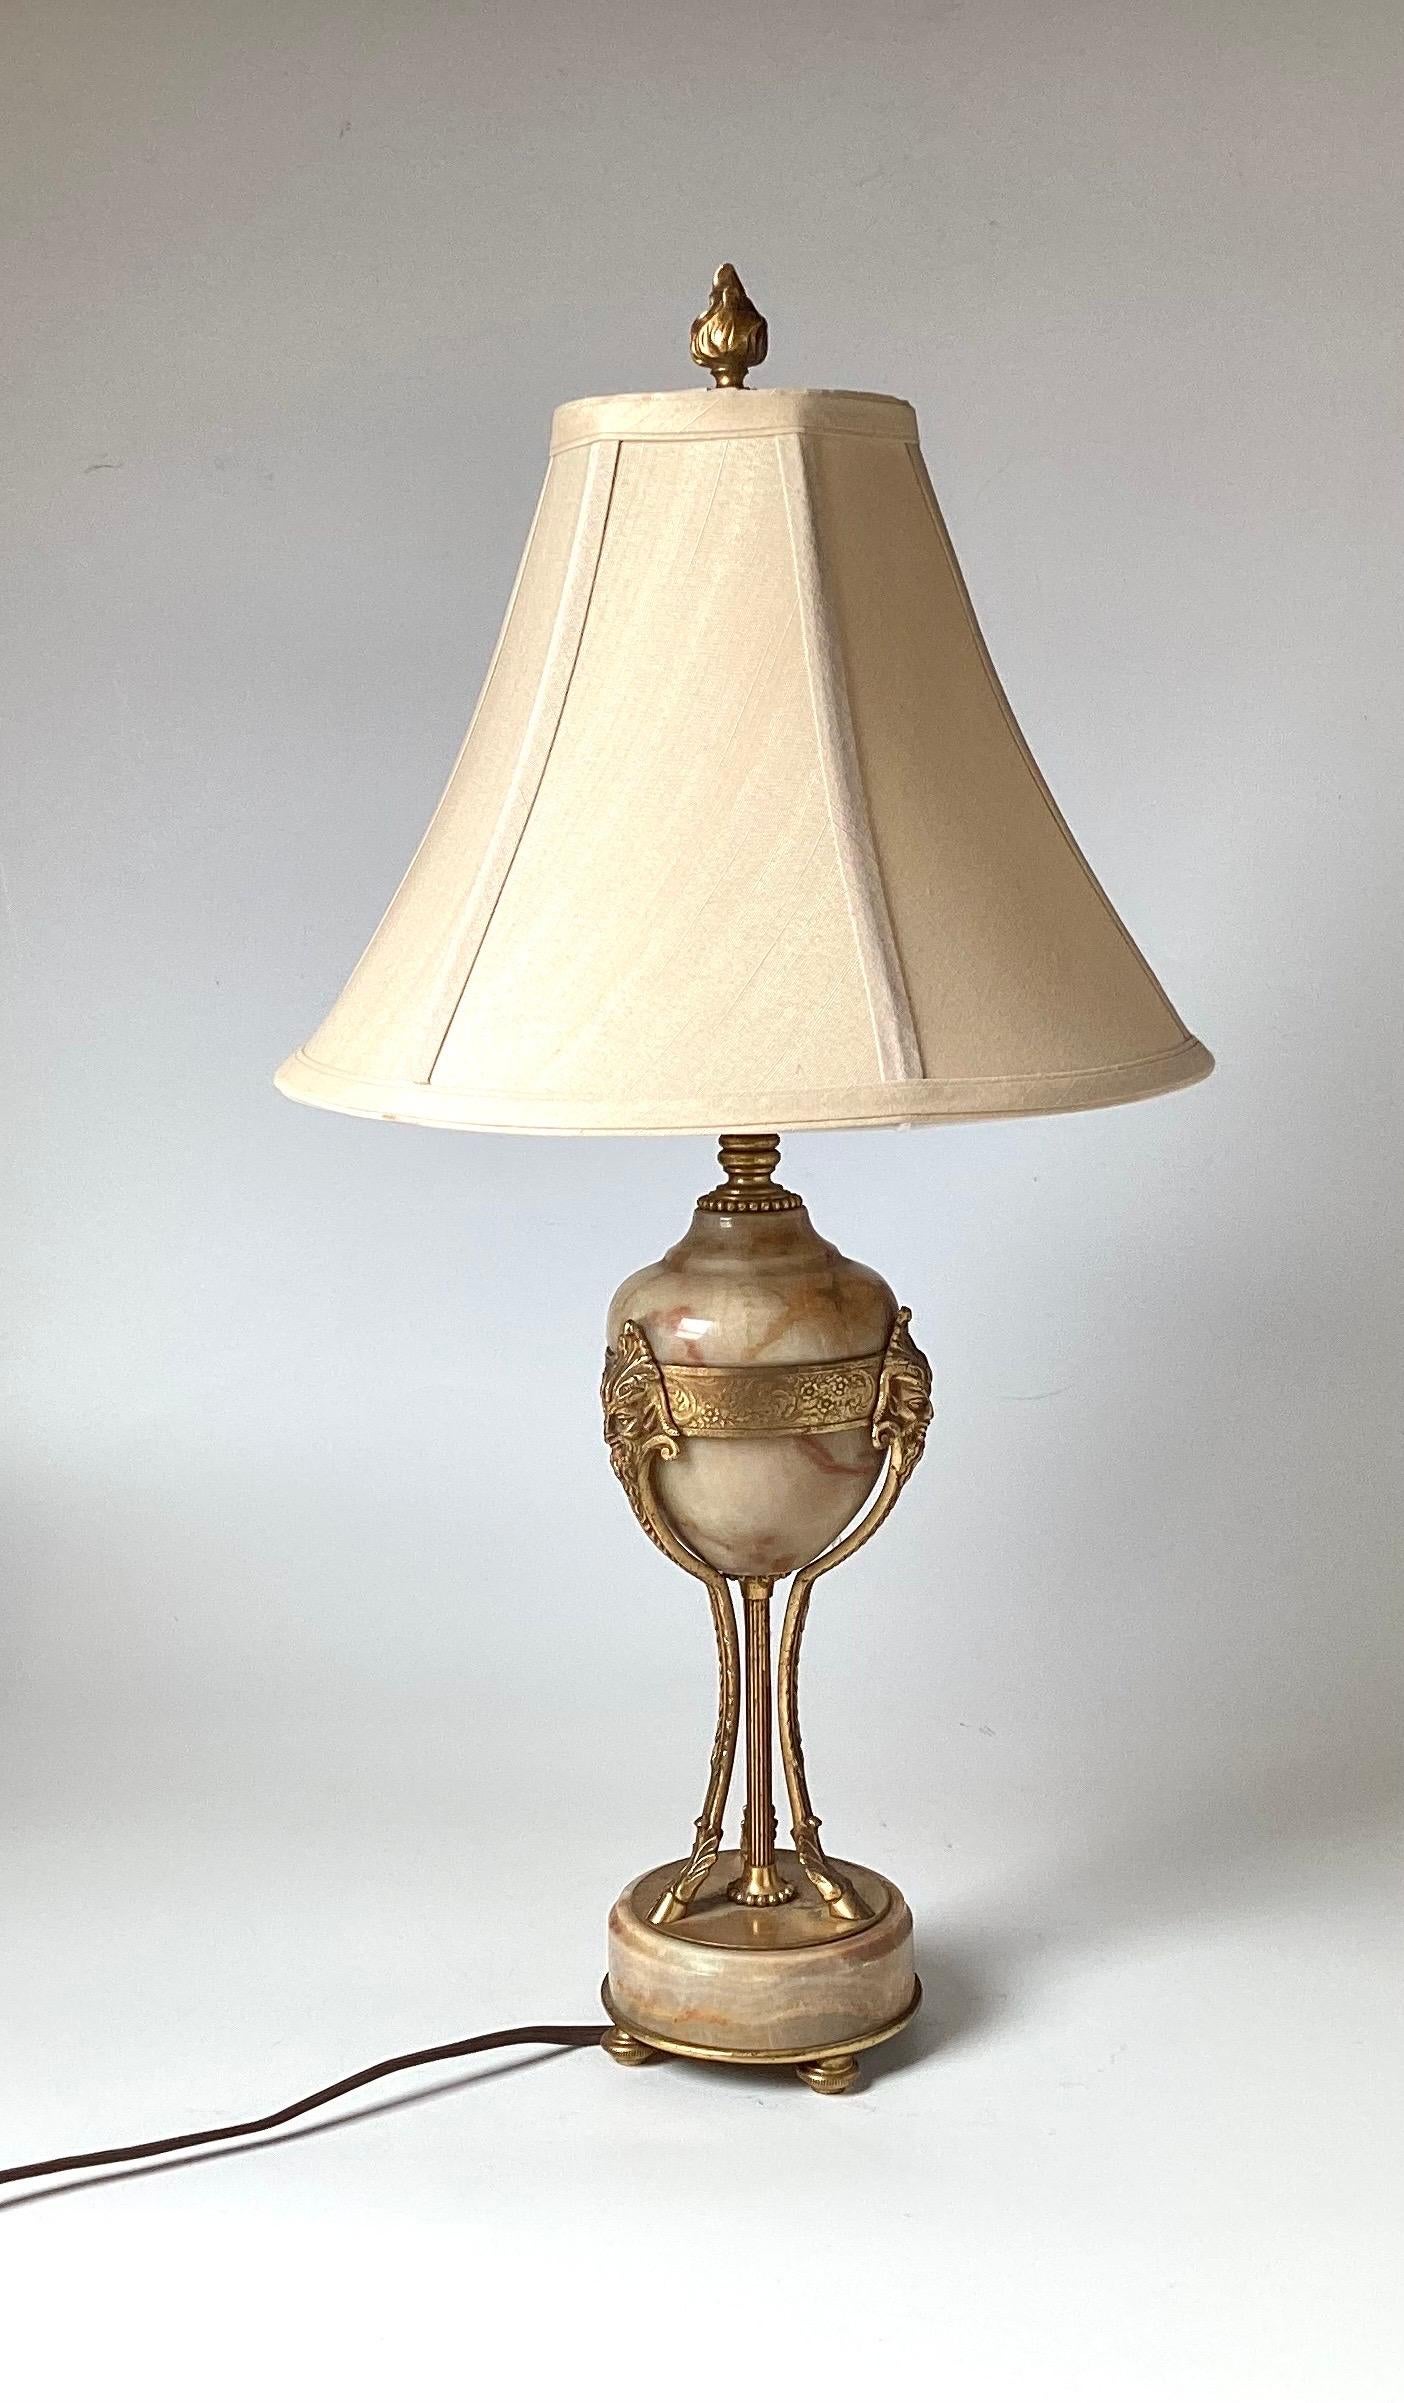 An elegant pair of Louis VXI style Bronze and marble diminutive table lamps with oval marble body with three gilt bronze legs attached to a round base.  The lamps are 21 inches tall, 4.5 inches in Diameter.  The shades are for photographic purposes